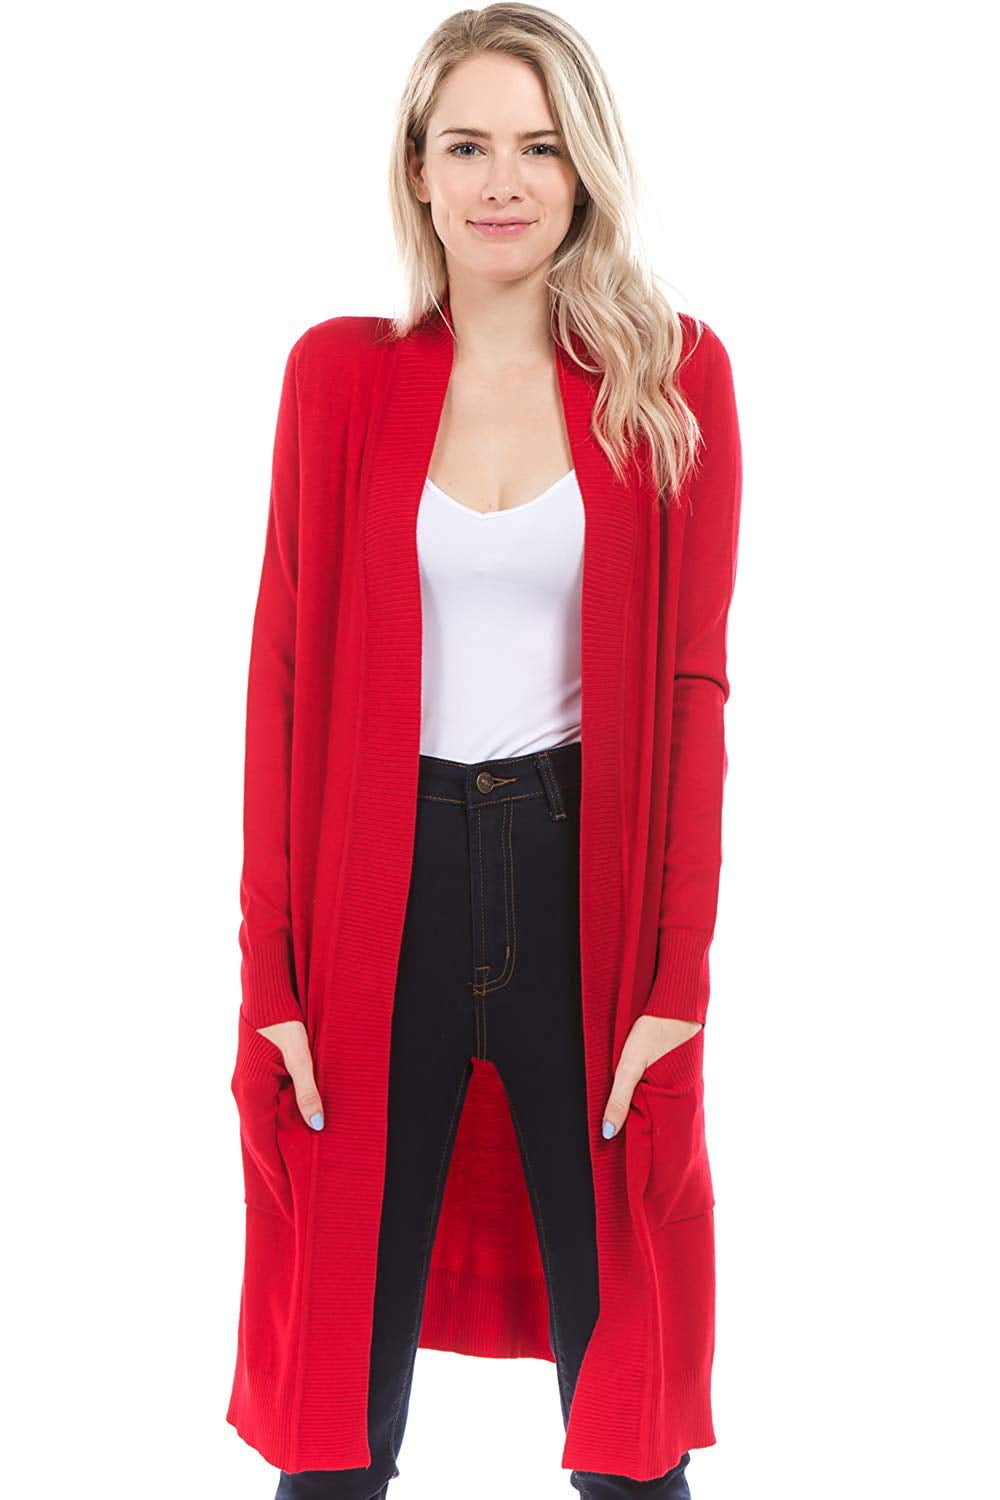 NEW Plus Size Open Front Long Duster Cardigan Sweater w/Side Pockets-XL/1X-2X-3X 